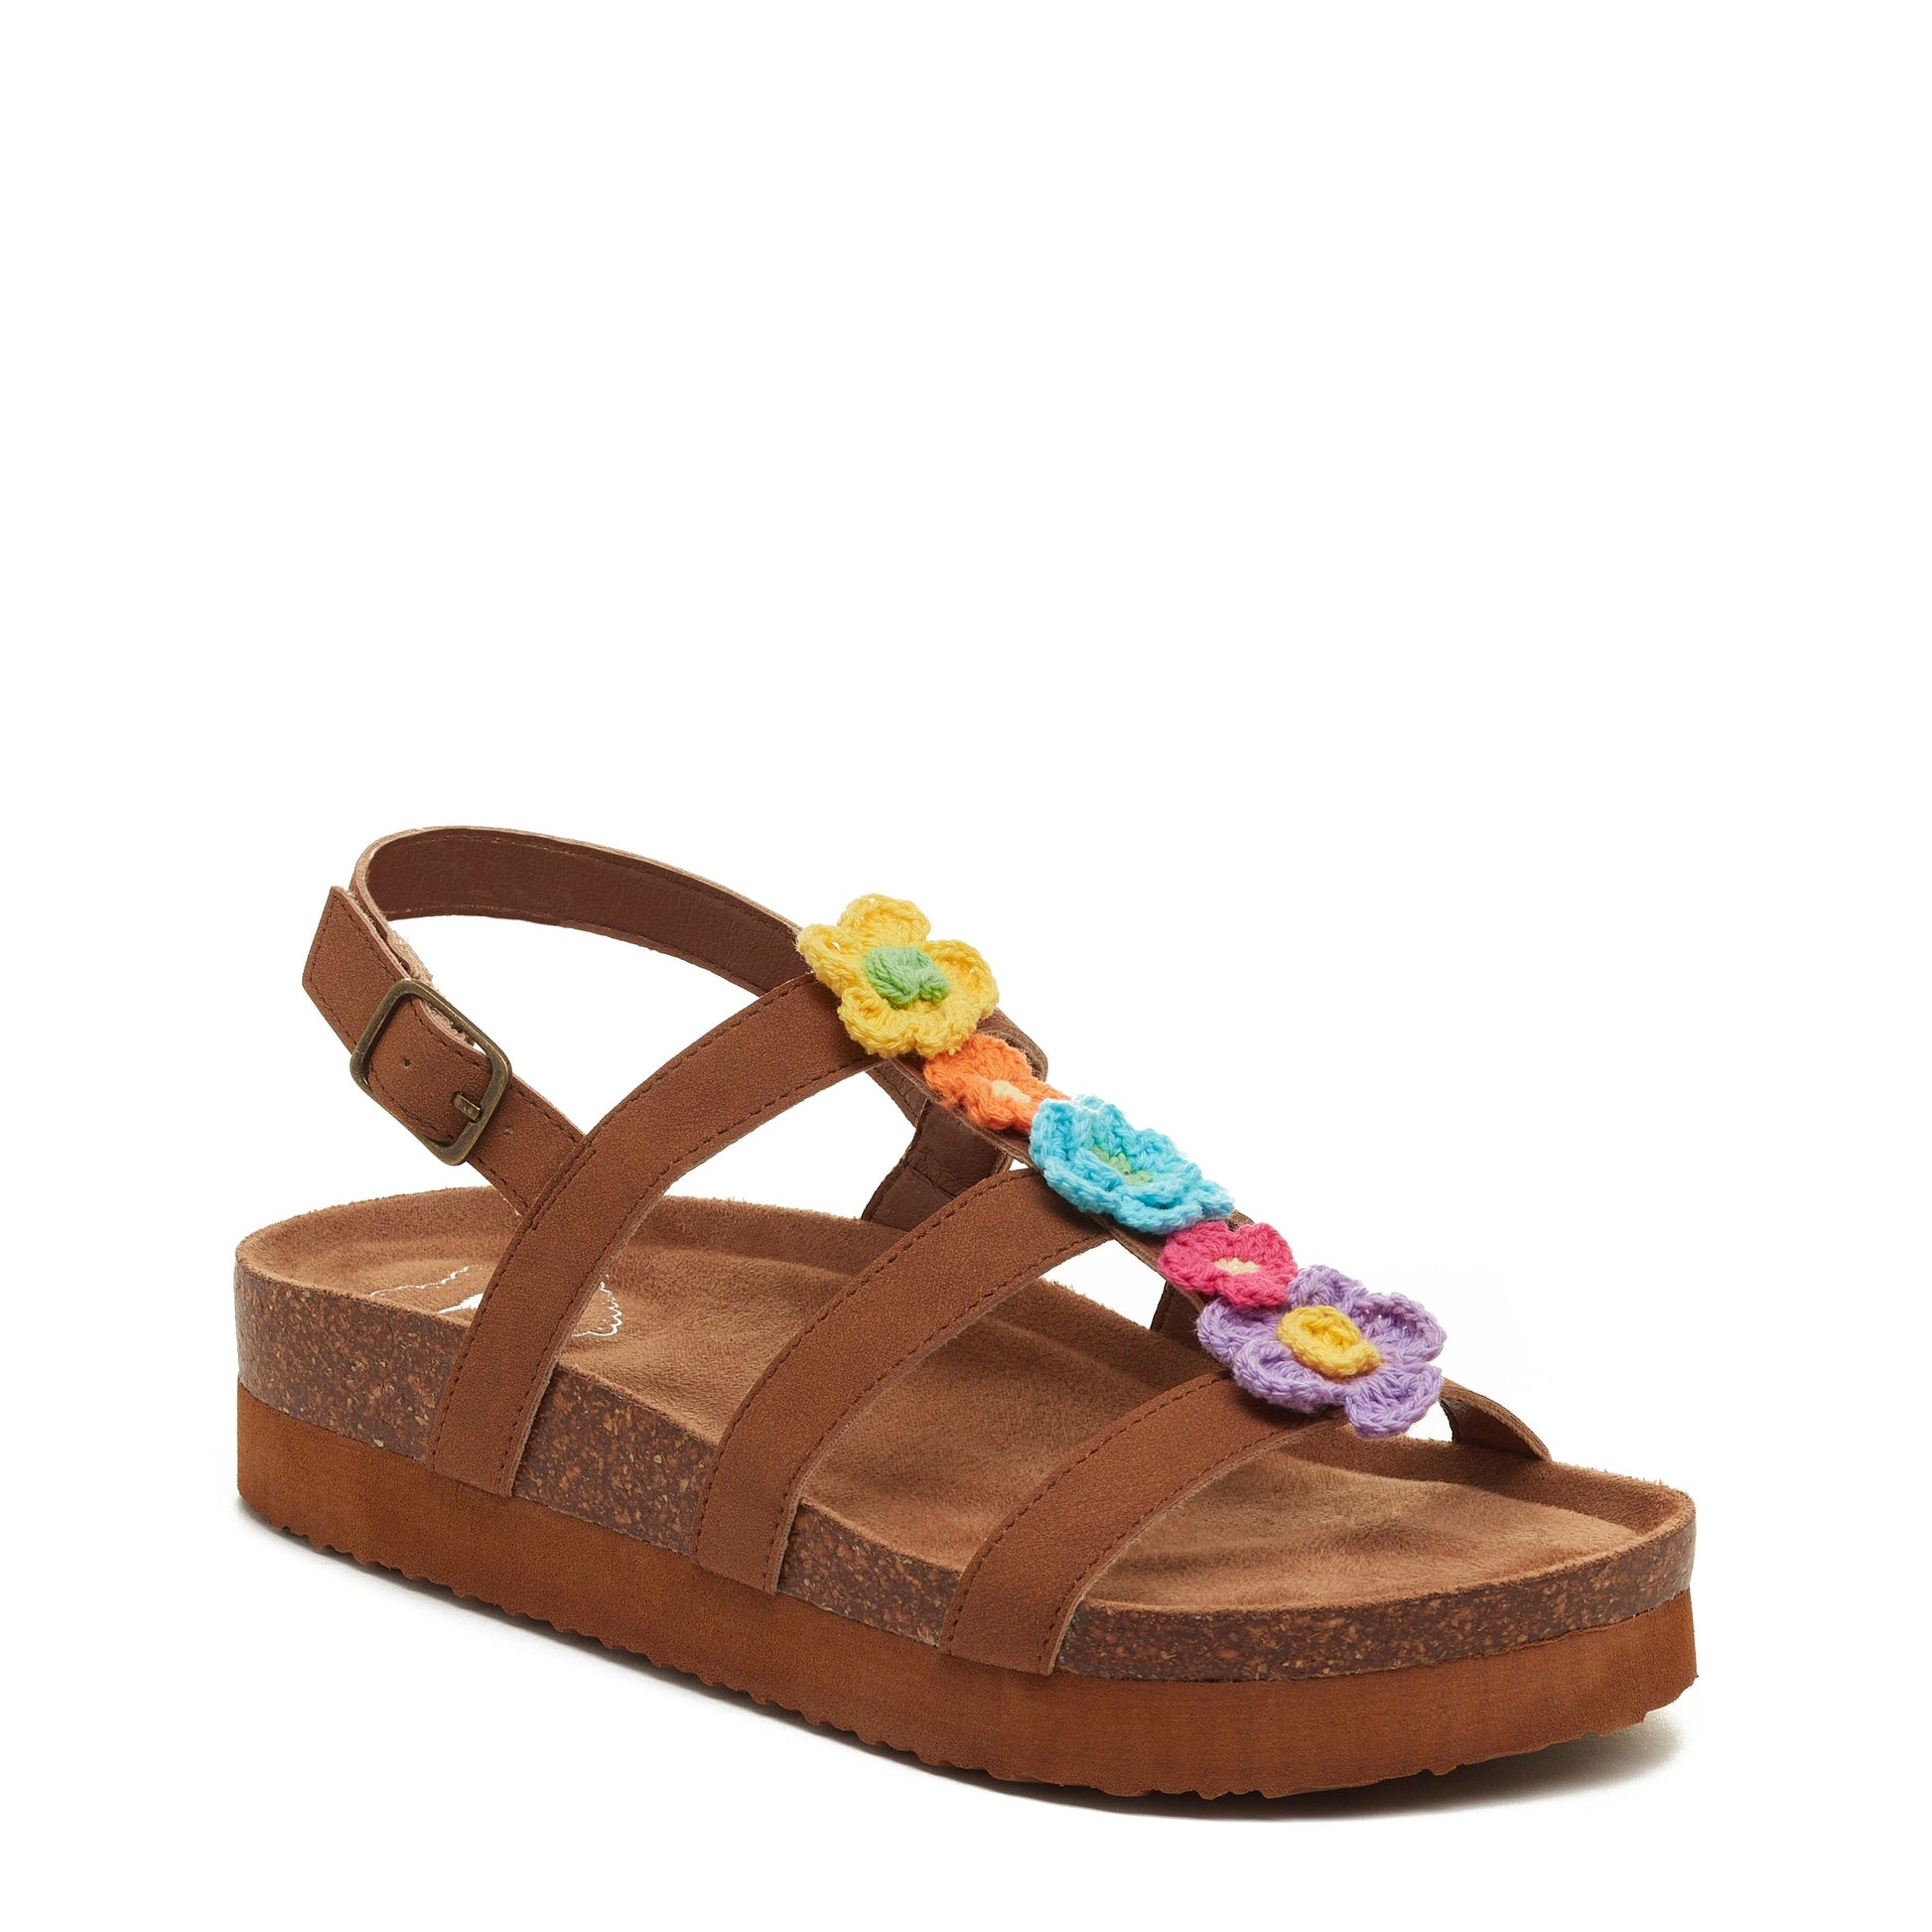 Abuzz Brown Buckle Strap Sandals